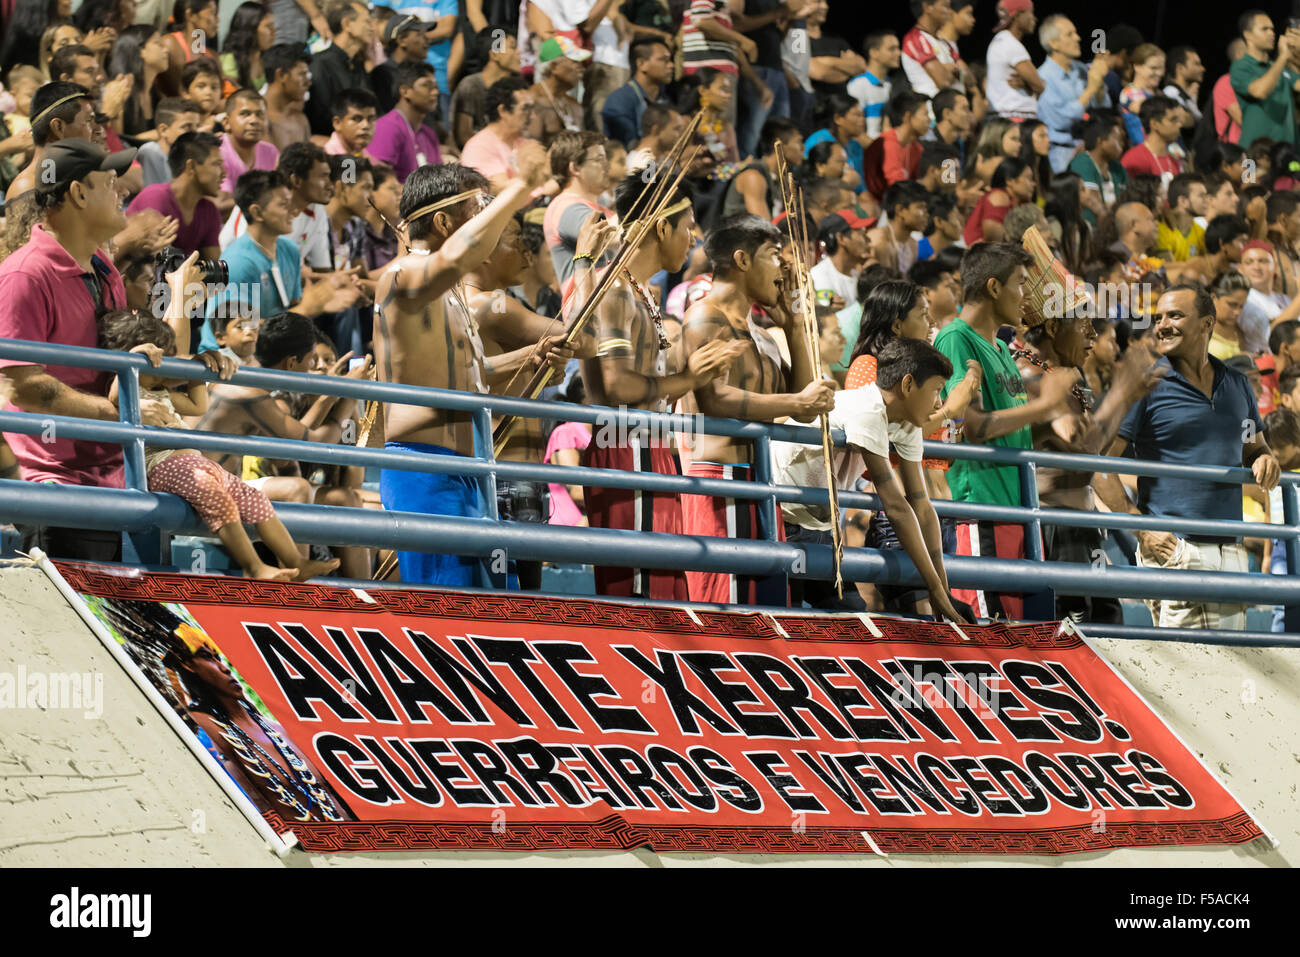 Palmas, Brazil. 30th October, 2015. Xerente warriors cheer in support of their women's team during the final of the women's football, between the local Xerente tribe and the Native American team from the USA at the International Indigenous Games in the city of Palmas, Tocantins State, Brazil. The USA won on a penalty shoot-out after a 0-0 match. Credit:  Sue Cunningham Photographic/Alamy Live News Stock Photo